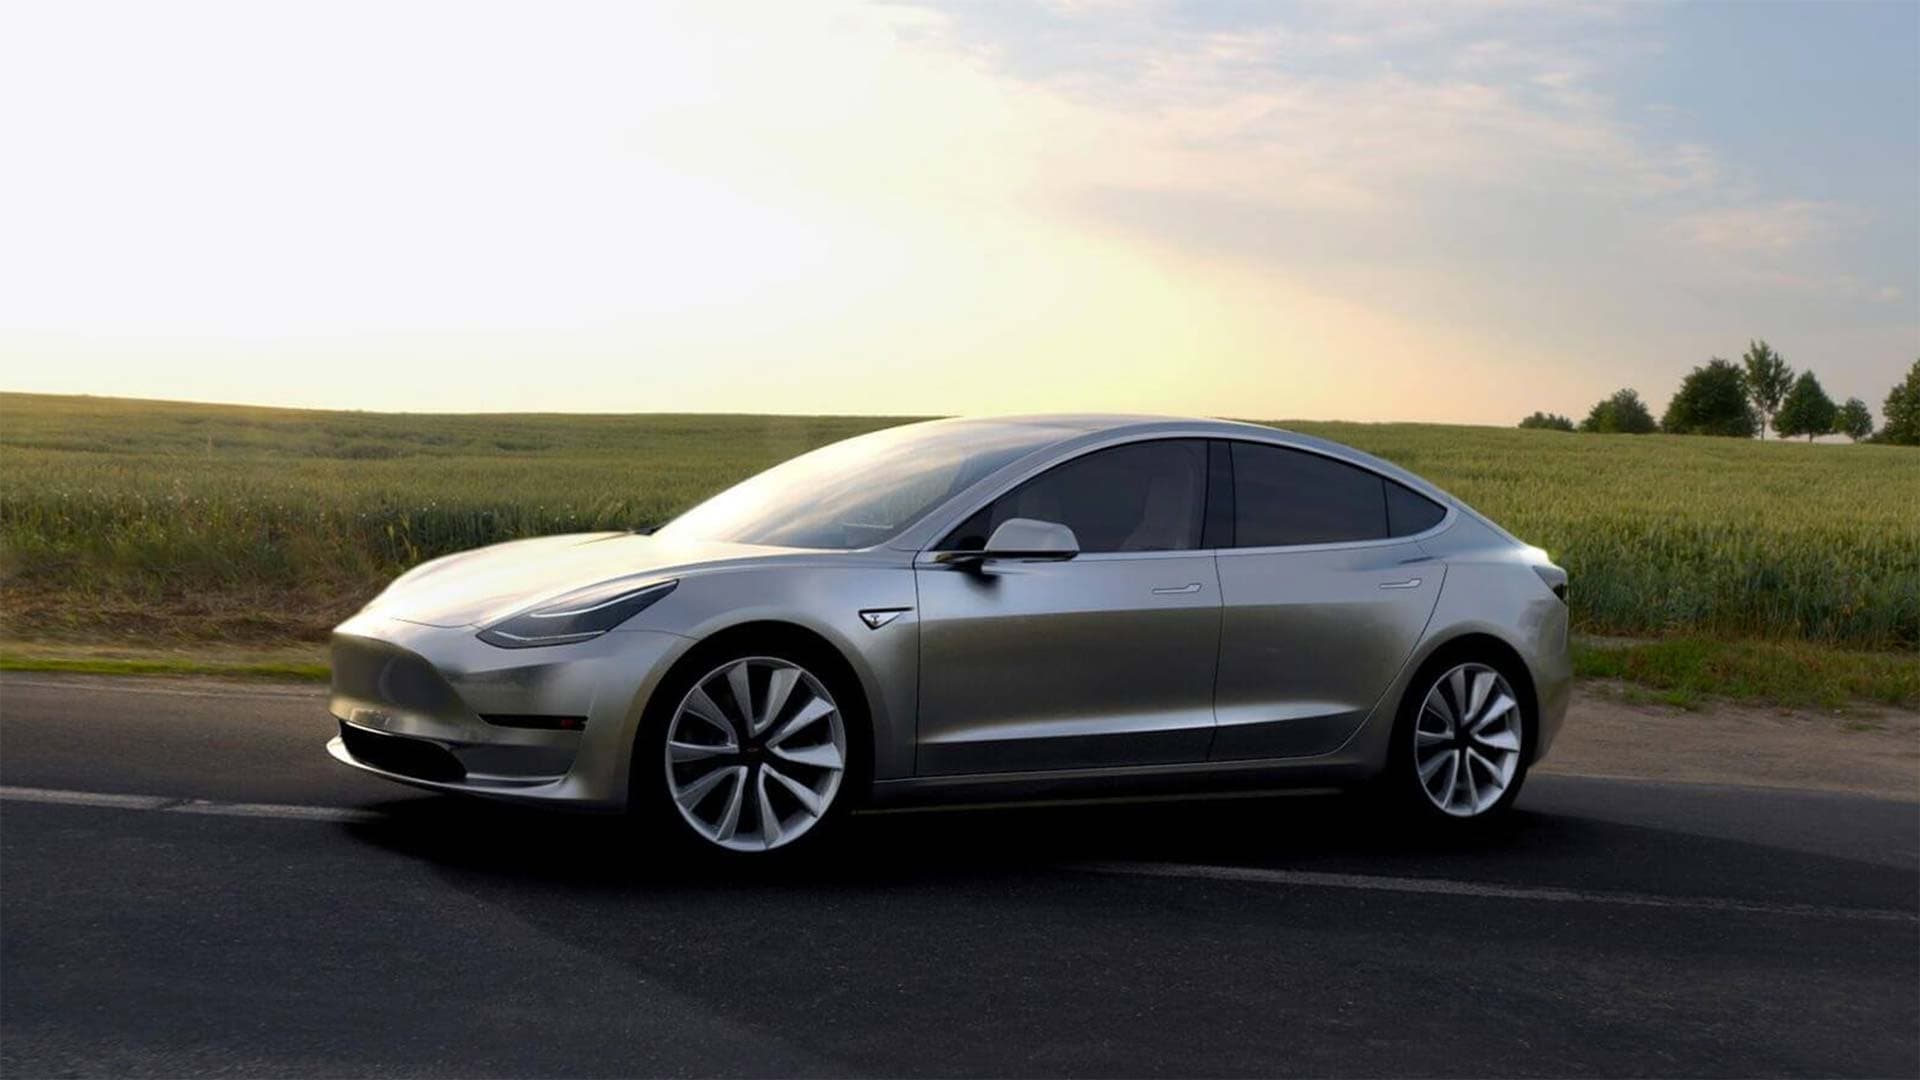 Production Tesla Model 3 Will Be Ready This Friday, Says Elon Musk